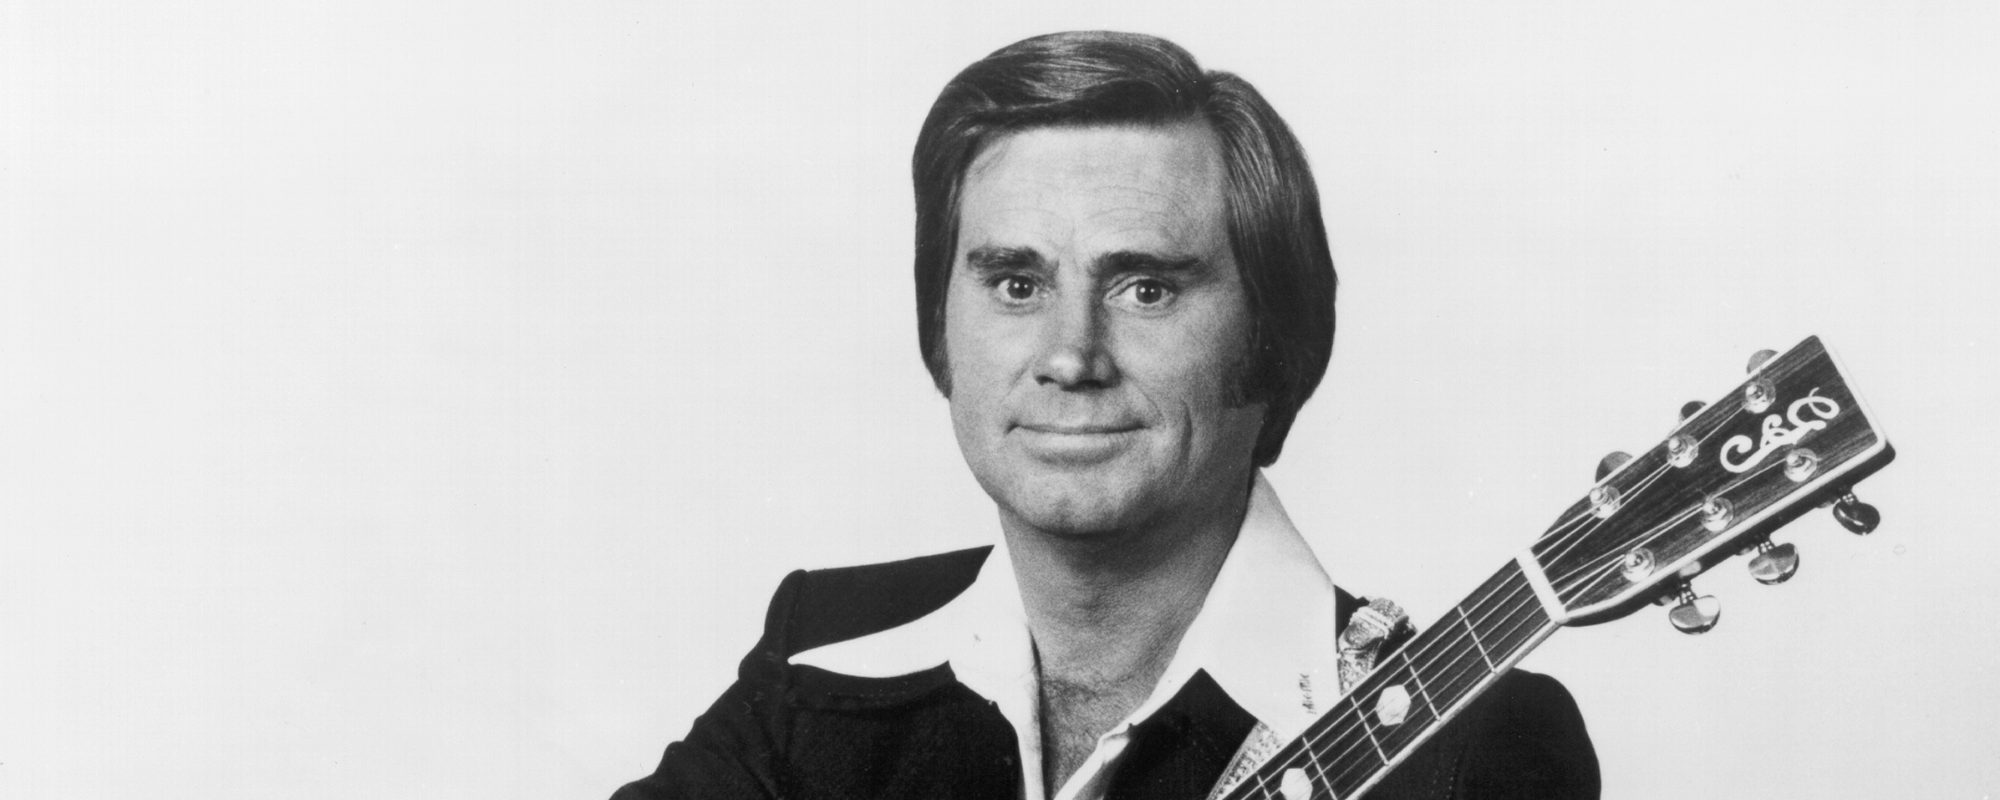 The Meaning Behind “The Grand Tour” by George Jones Hit a Bit Too Close to Home